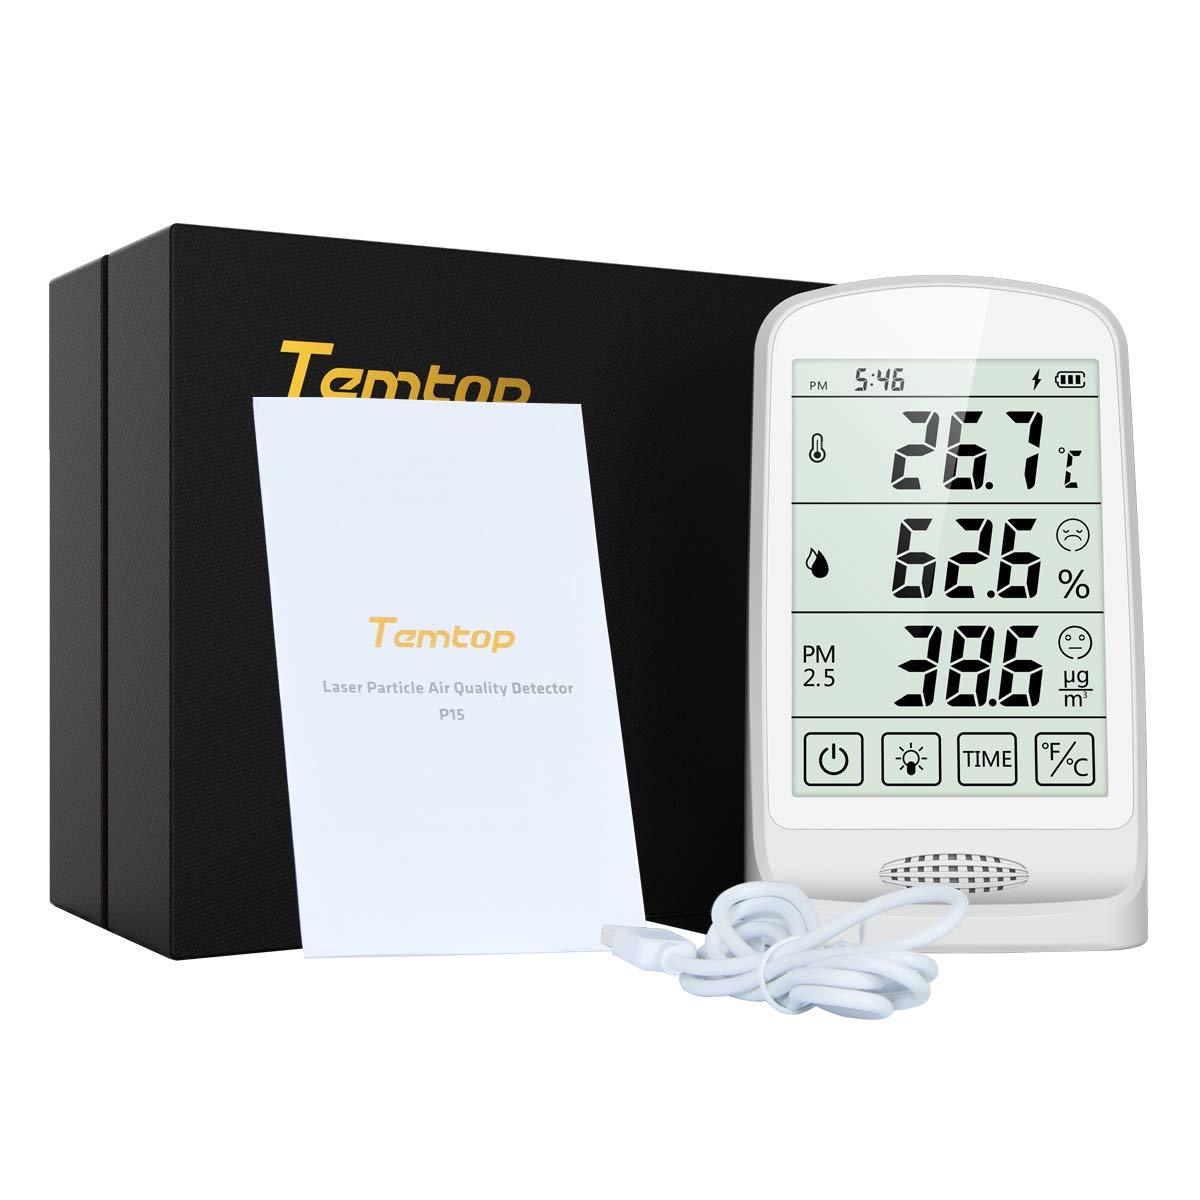 Temtop P15 Air Quality Monitor, PM2.5 AQI Temperature and Humidity Real-time Detecting and Display